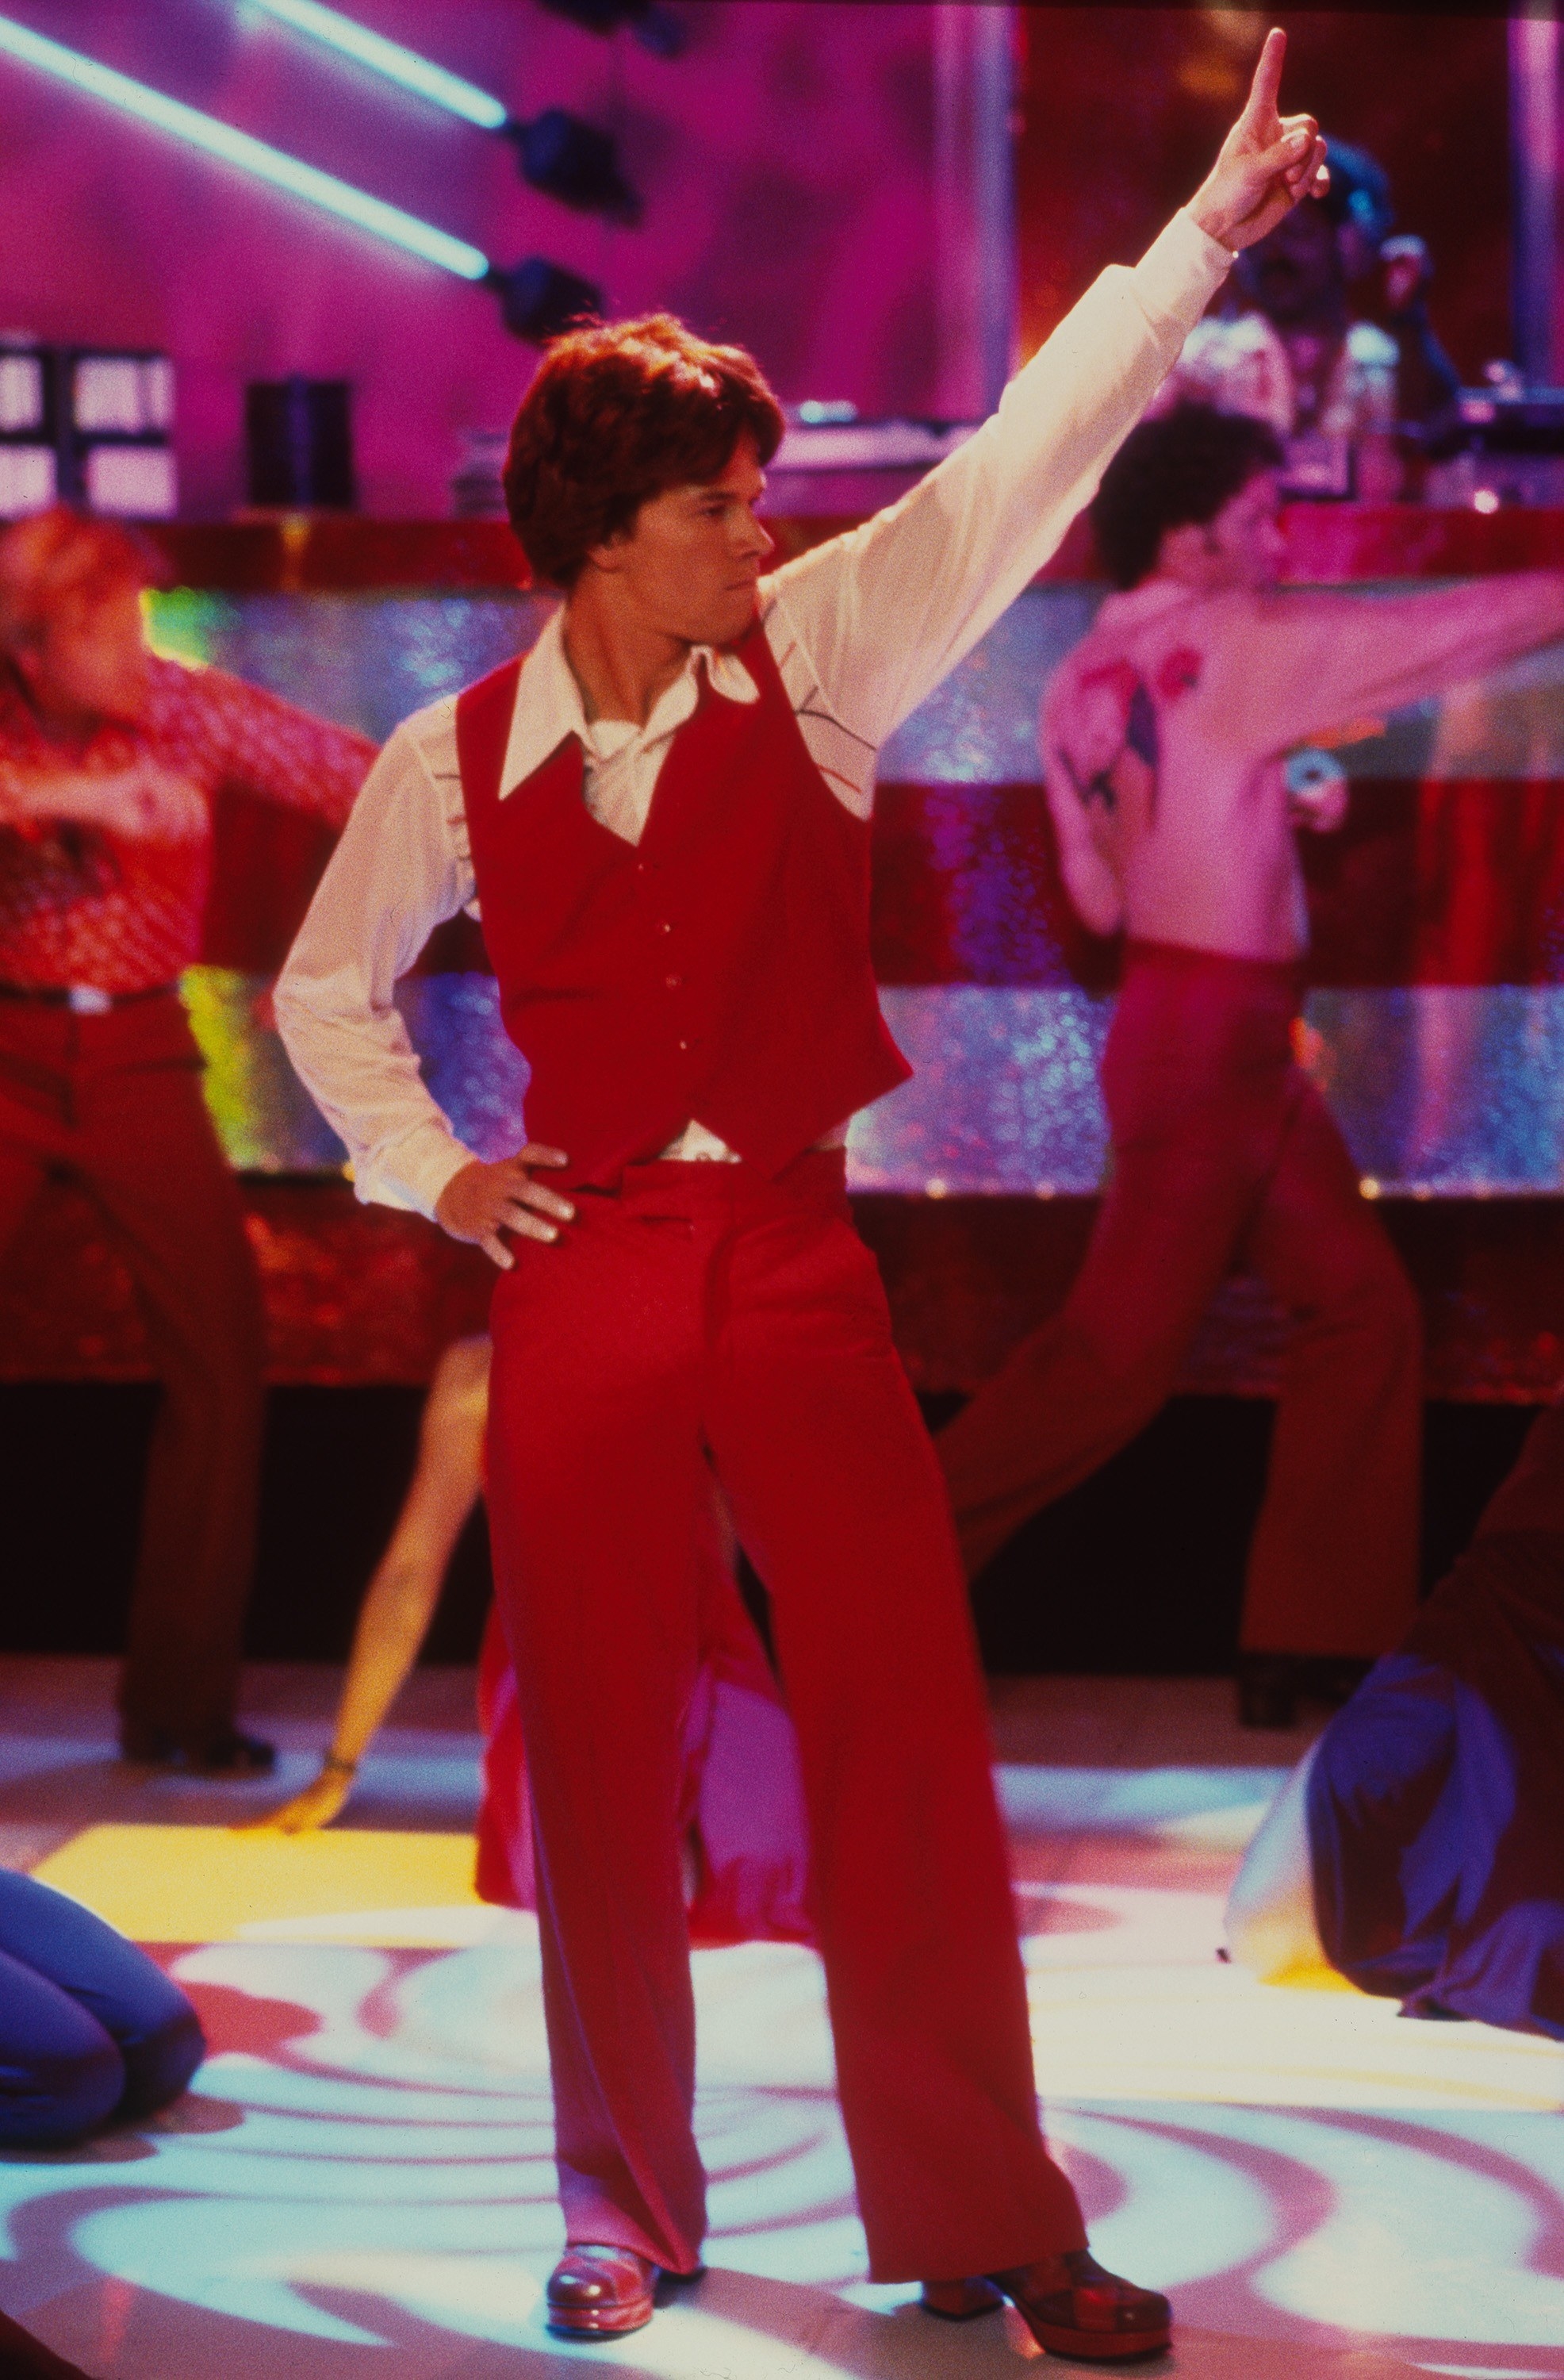 Mark Wahlberg at the disco in "Boogie Nights"